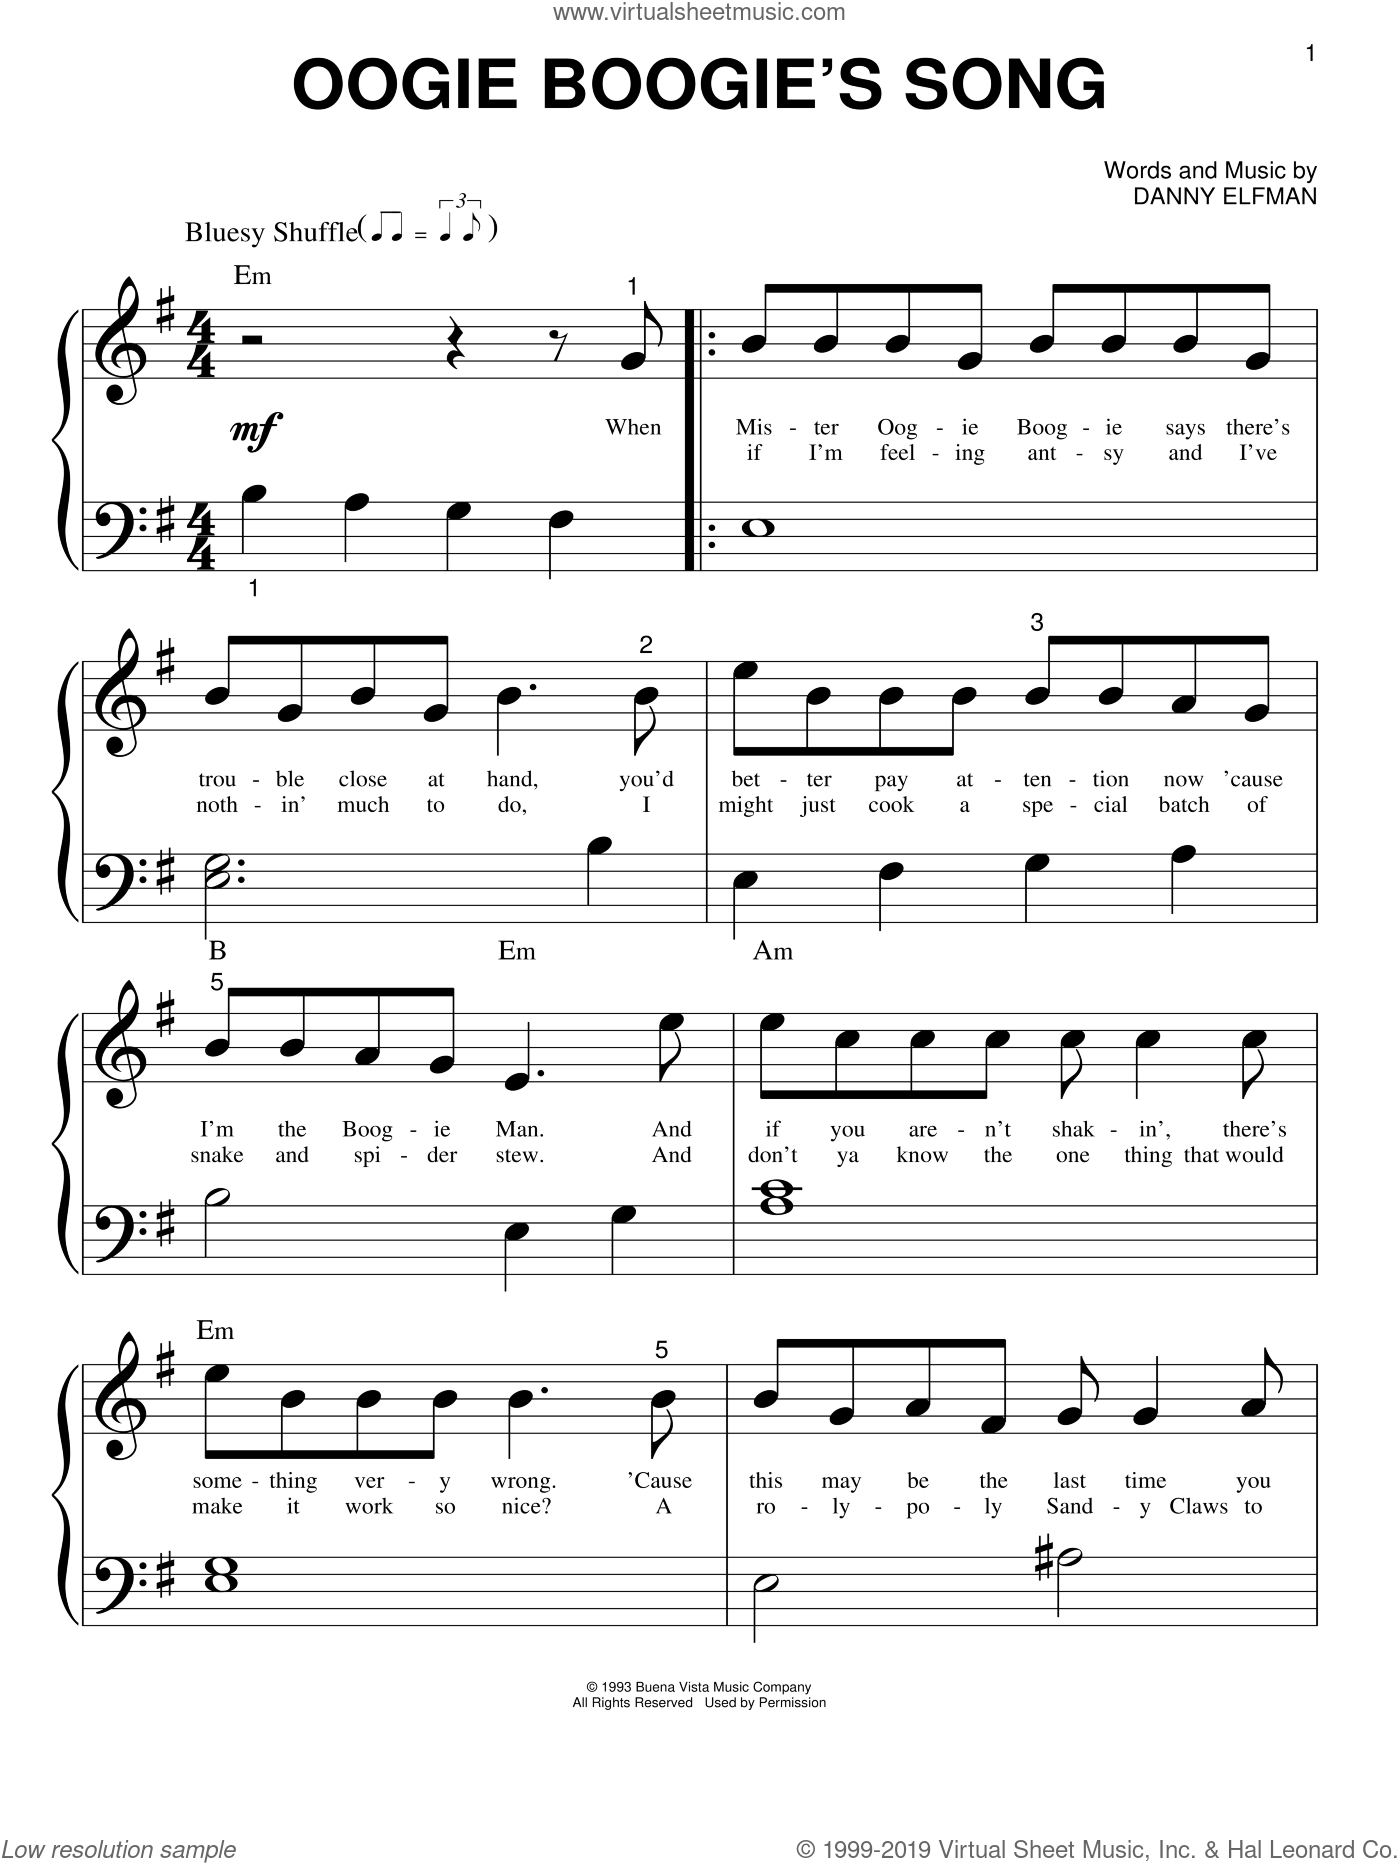 Elfman - Oogie Boogie's Song (from The Nightmare Before Christmas) sheet music for piano solo ...